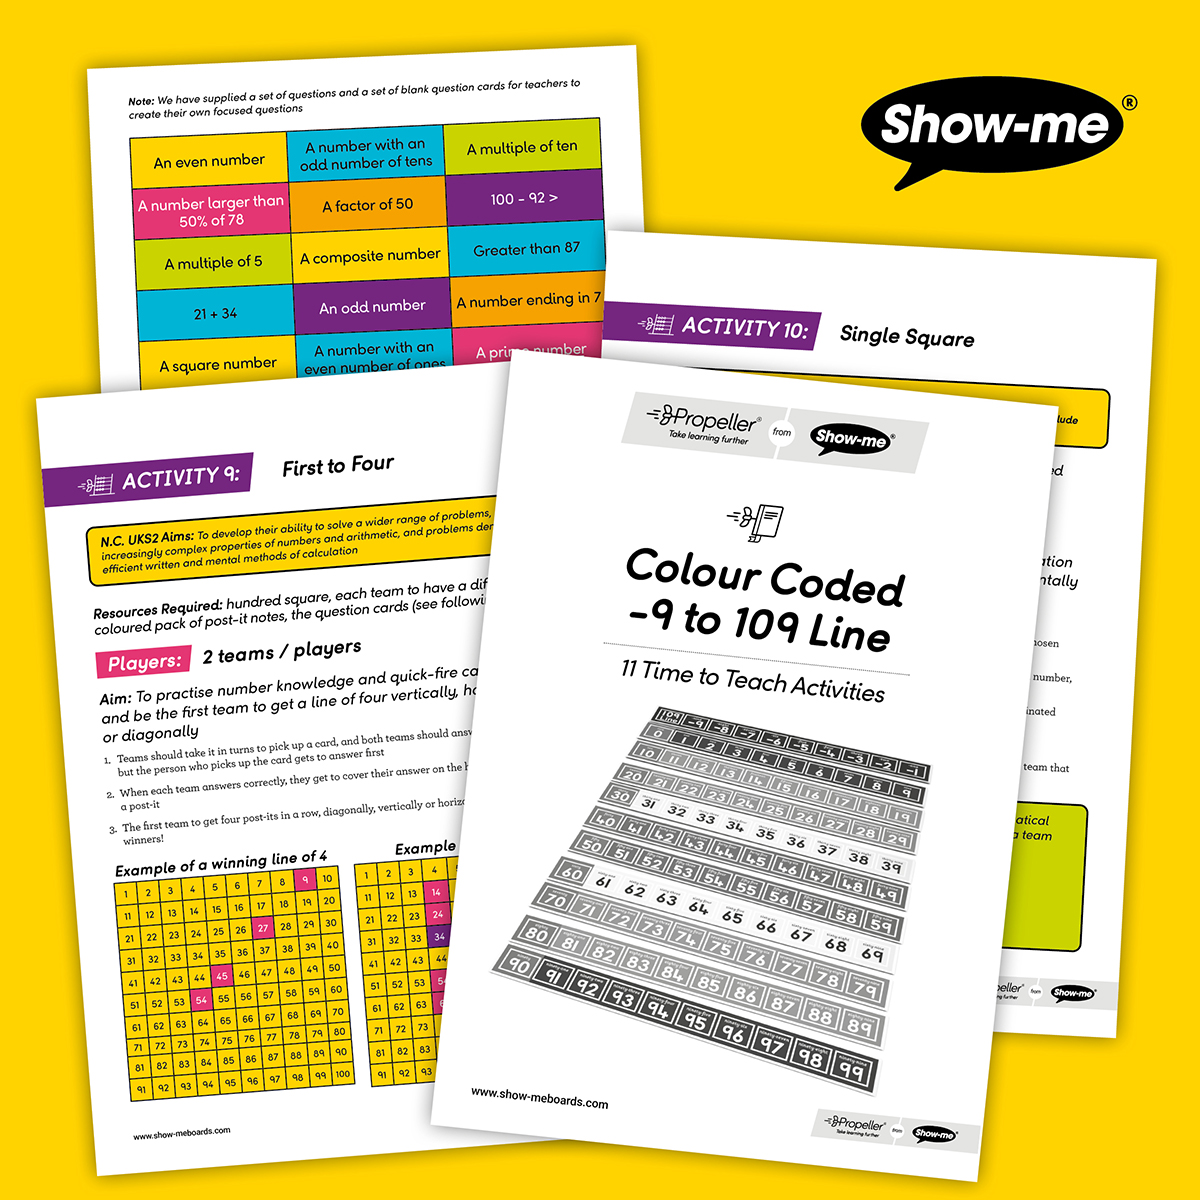 Time to Teach – Colour Coded -9 to 109 Line Colour – Download